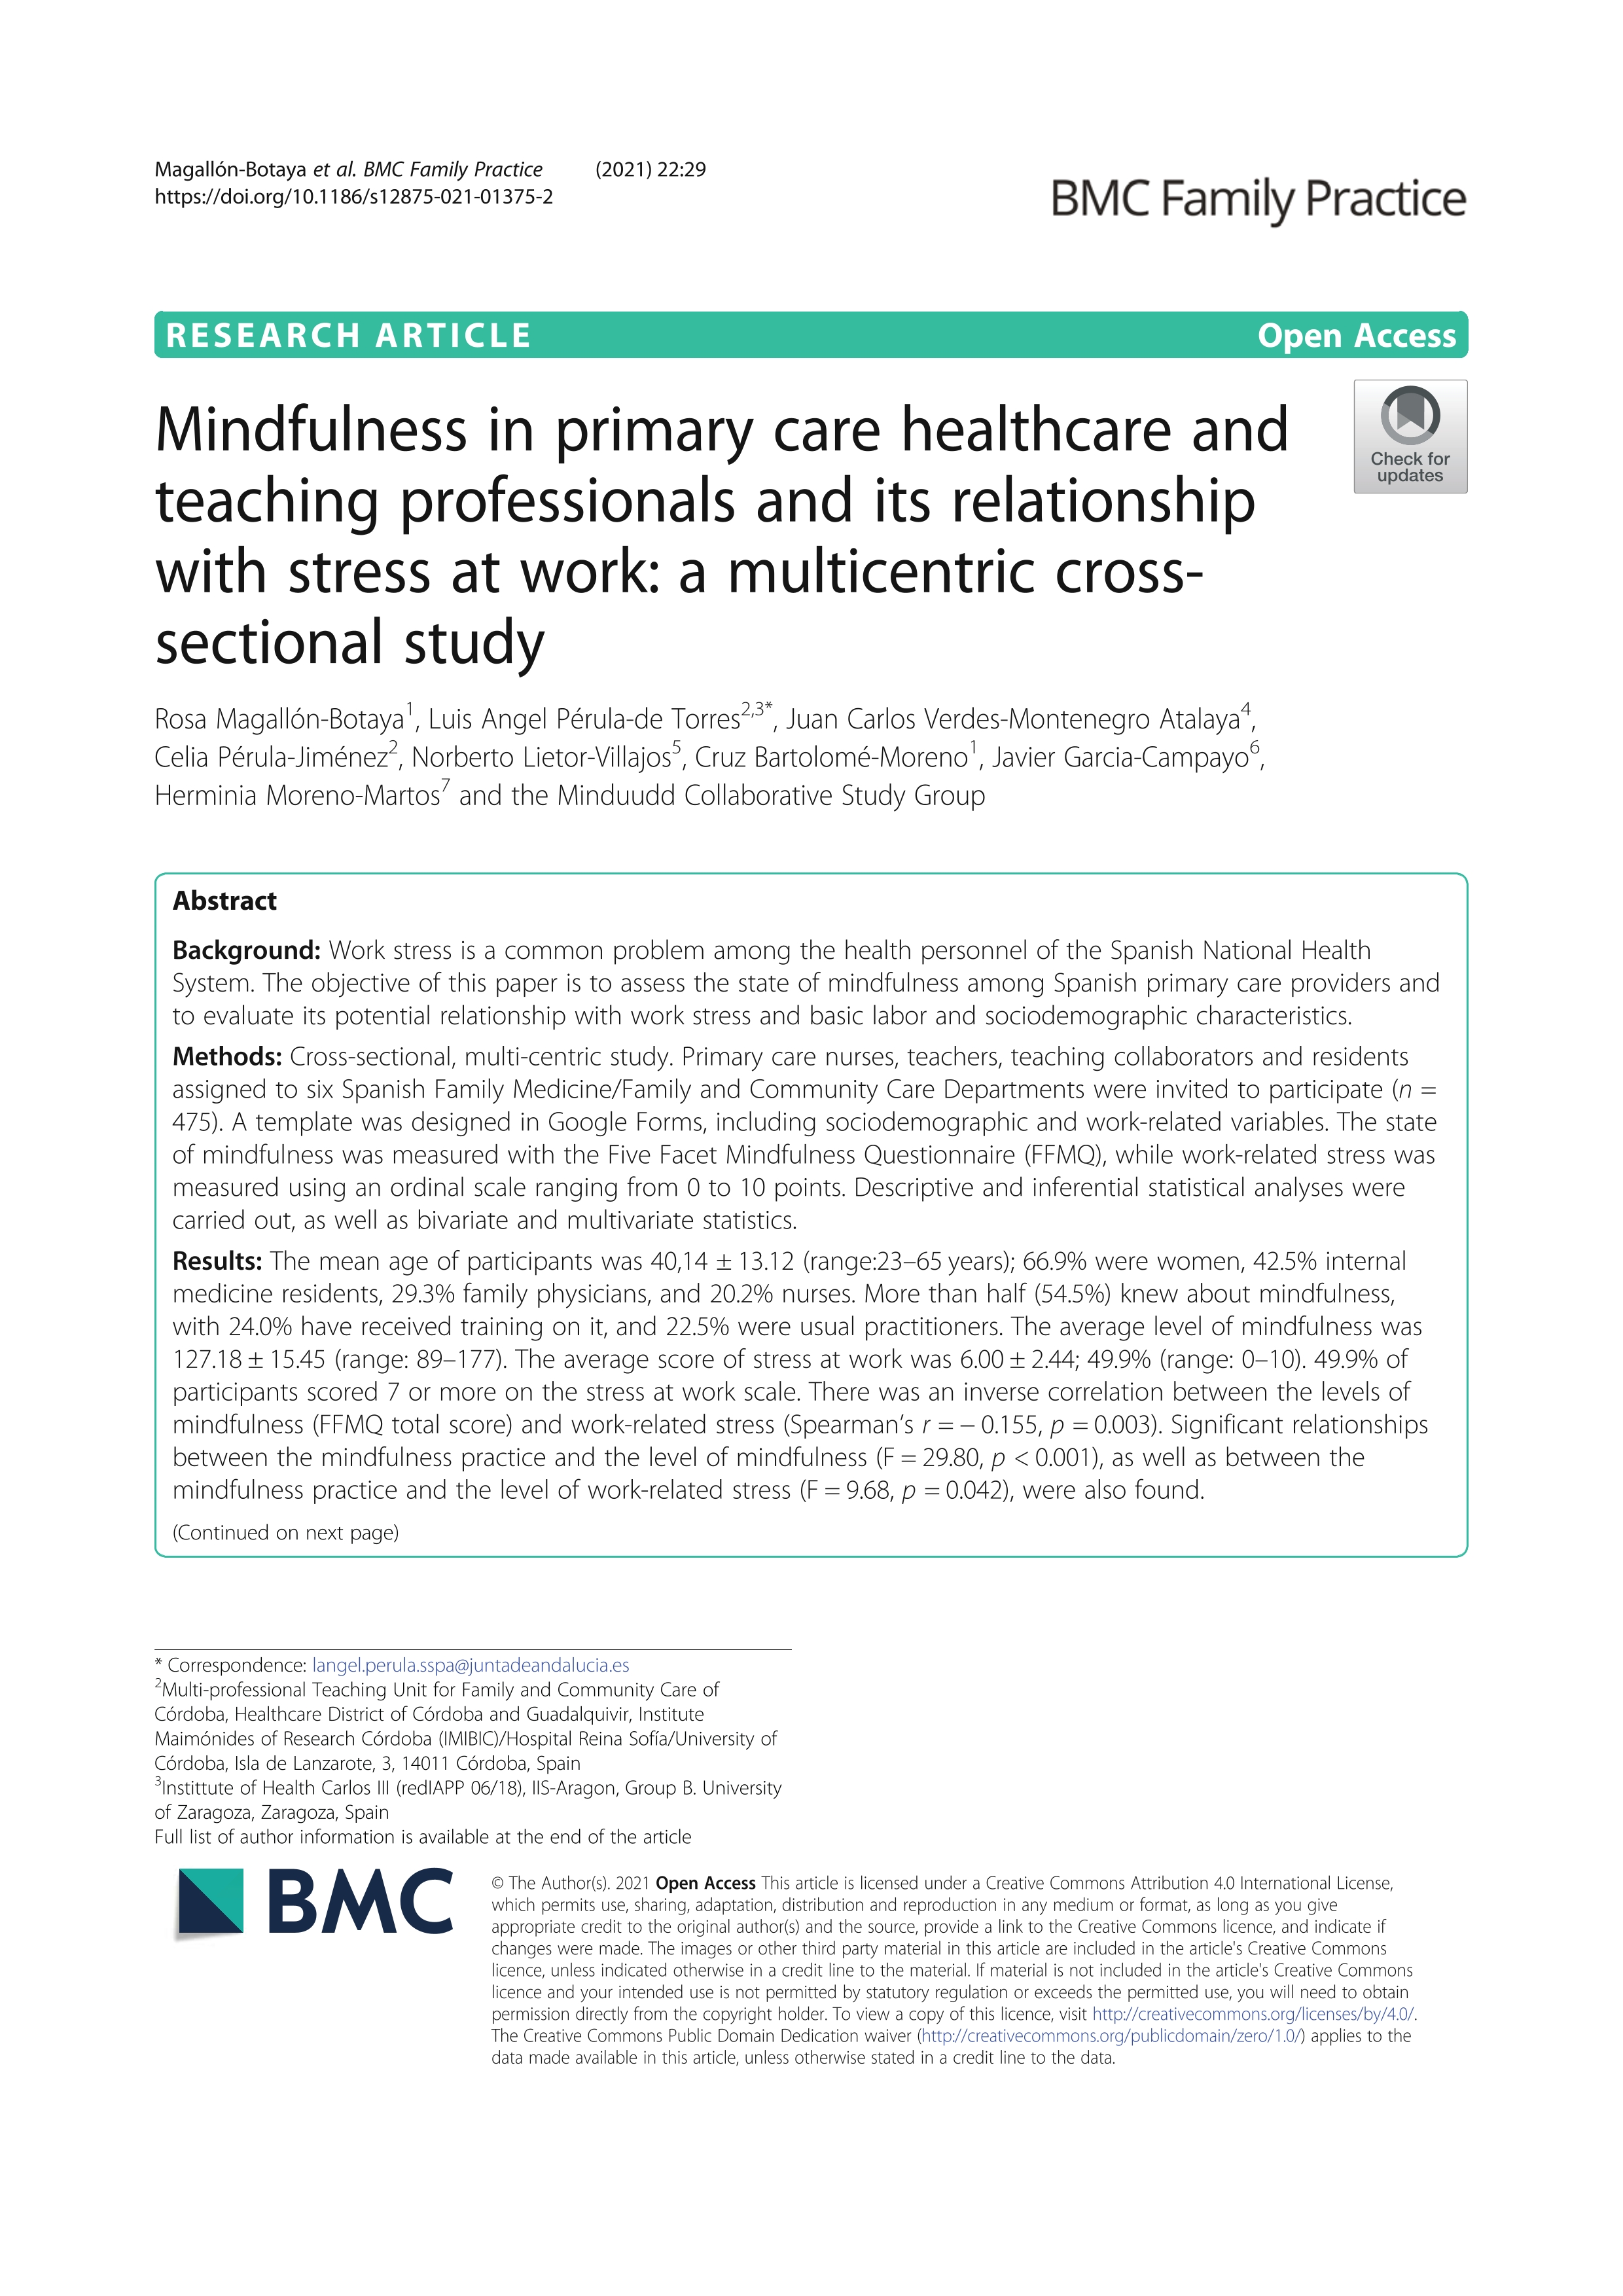 Mindfulness in primary care healthcare and teaching professionals and its relationship with stress at work: a multicentric cross-sectional study